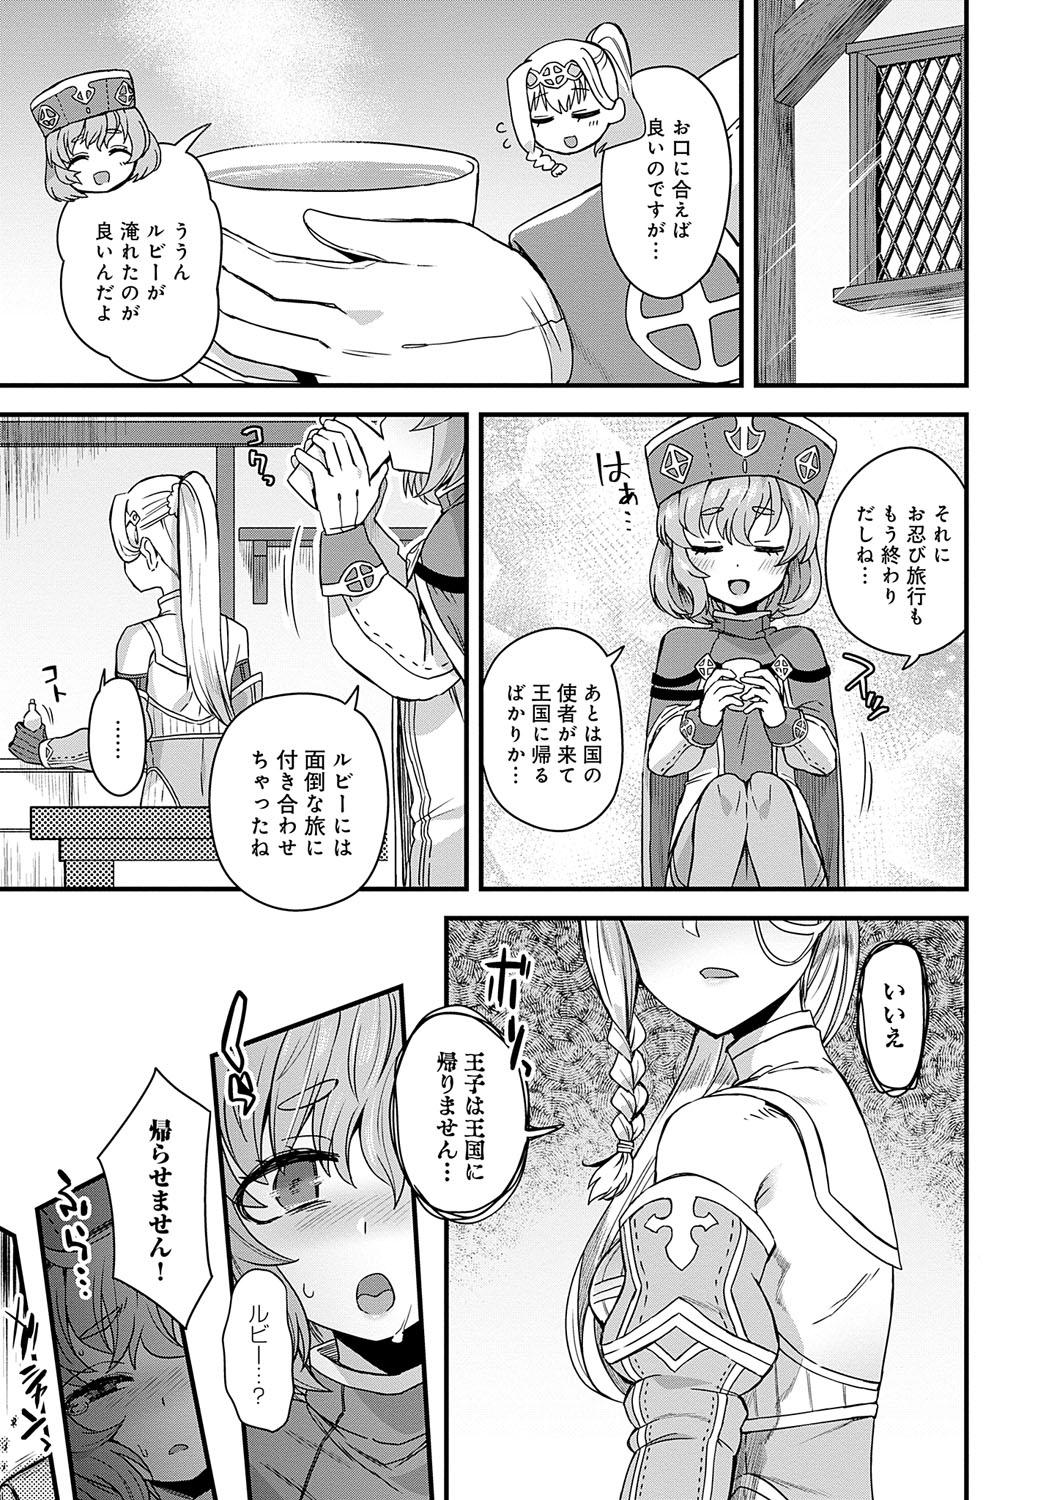 First Time Watashi to Issho ni... - With me... Reversecowgirl - Page 6